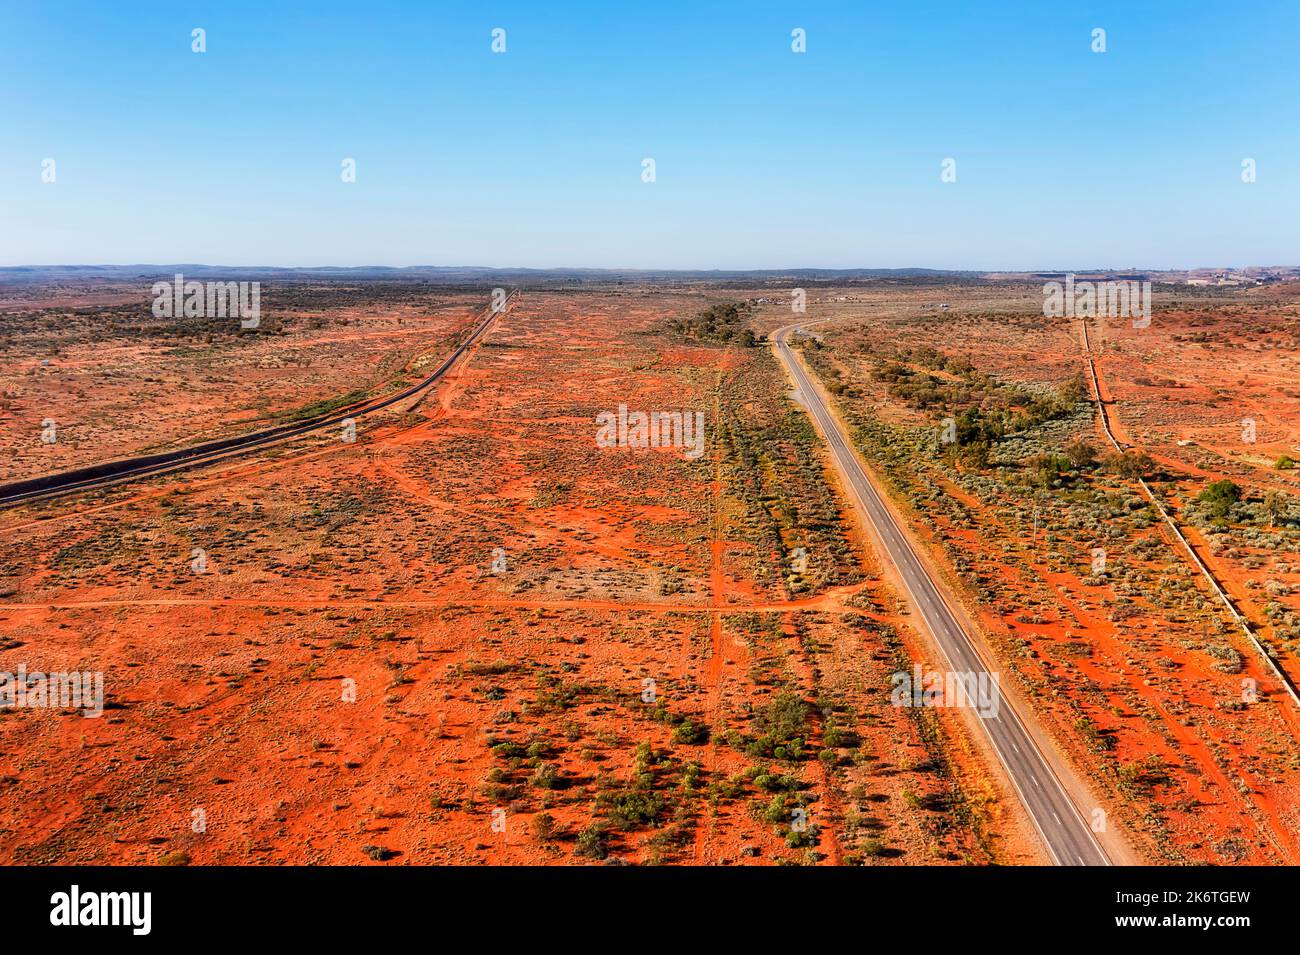 A32 Barrier highway near railway line to Broken Hill city in Australian outback. Stock Photo